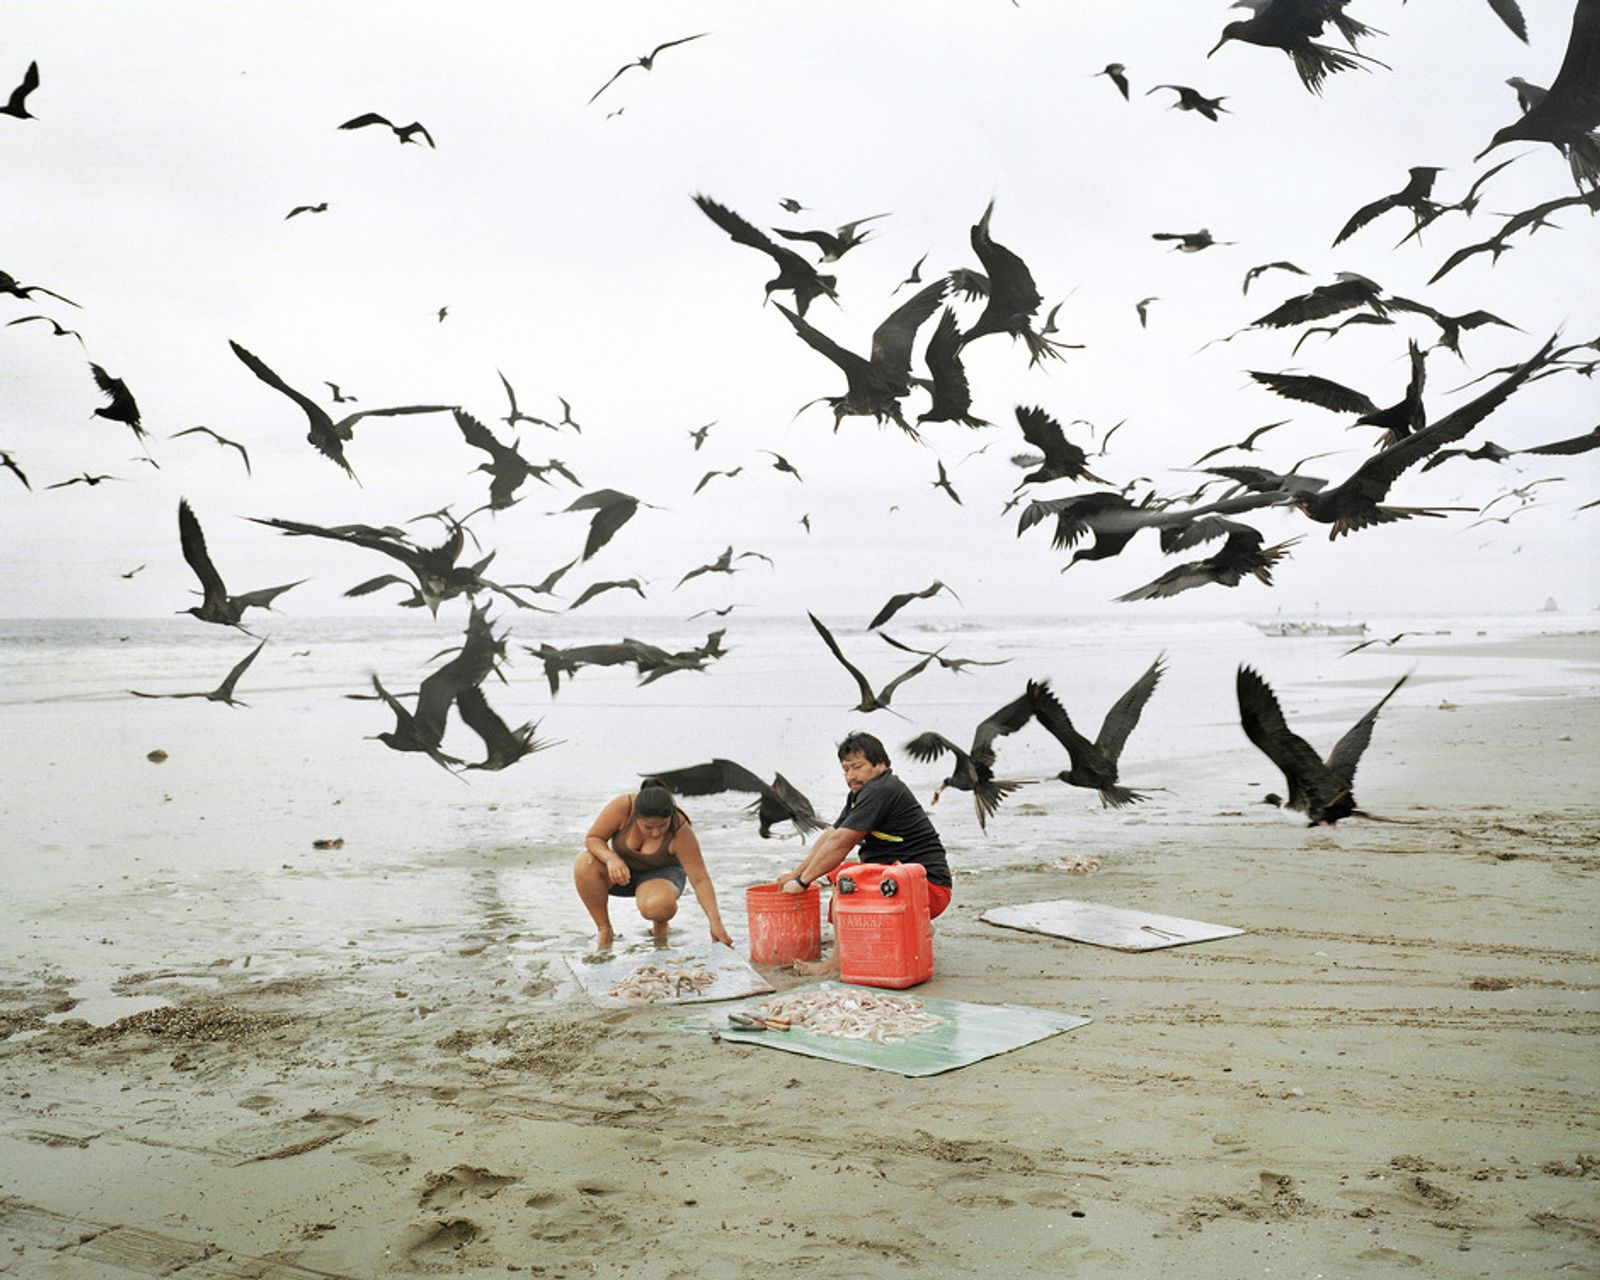 © Pietro Paolini - A fisherman cleans the fish with his wife on a beach in Manabì. October 2012.